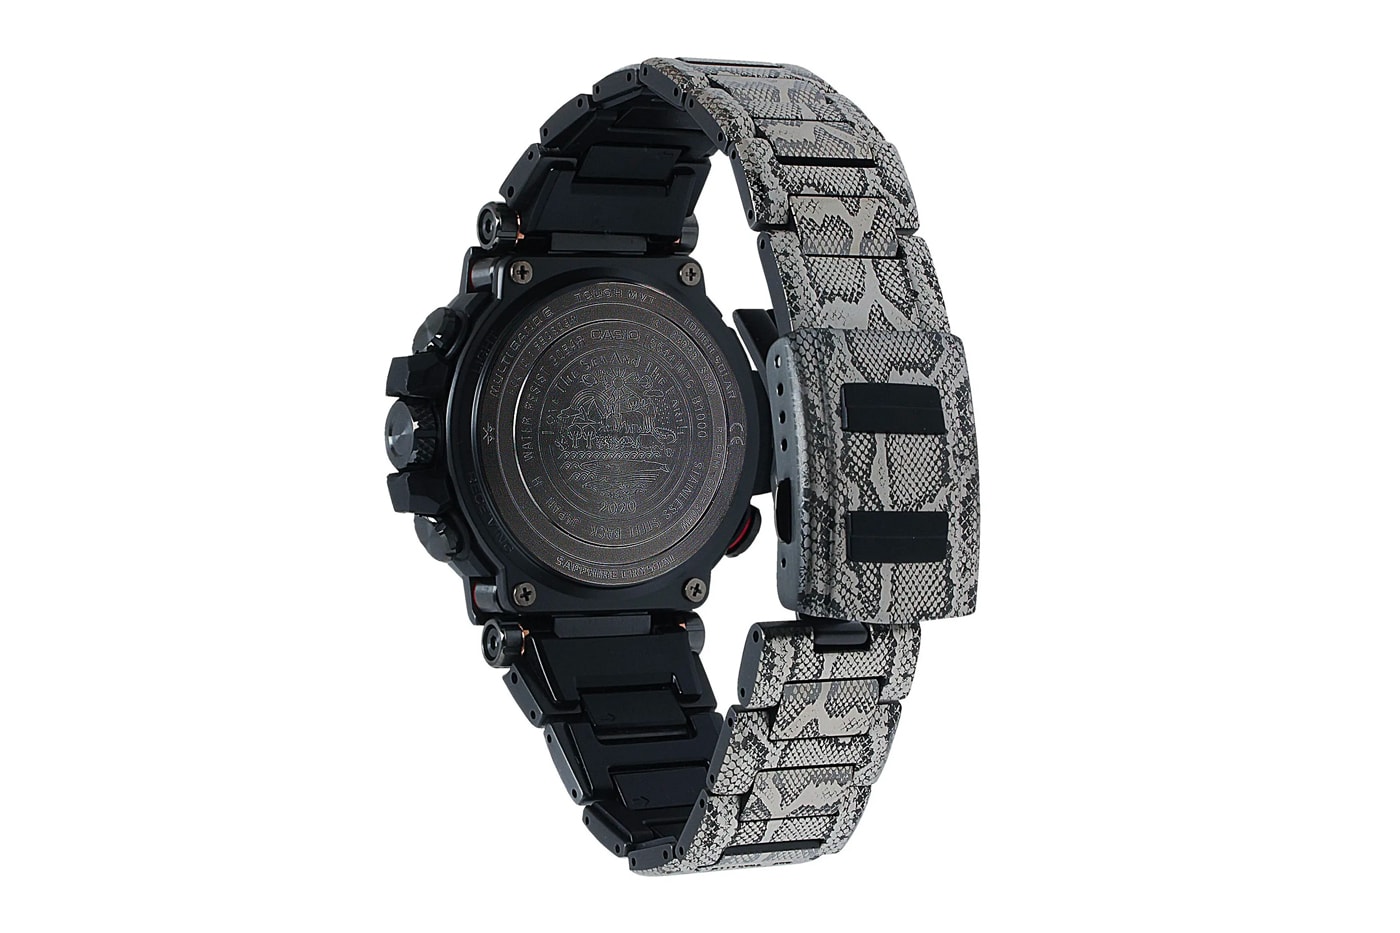 Wildlife Promising G SHOCK MTGB1000WLP1 Rock Python casio watches watch accessories collaboration snakeskin fall winter 2020 collection fw20 capsule 